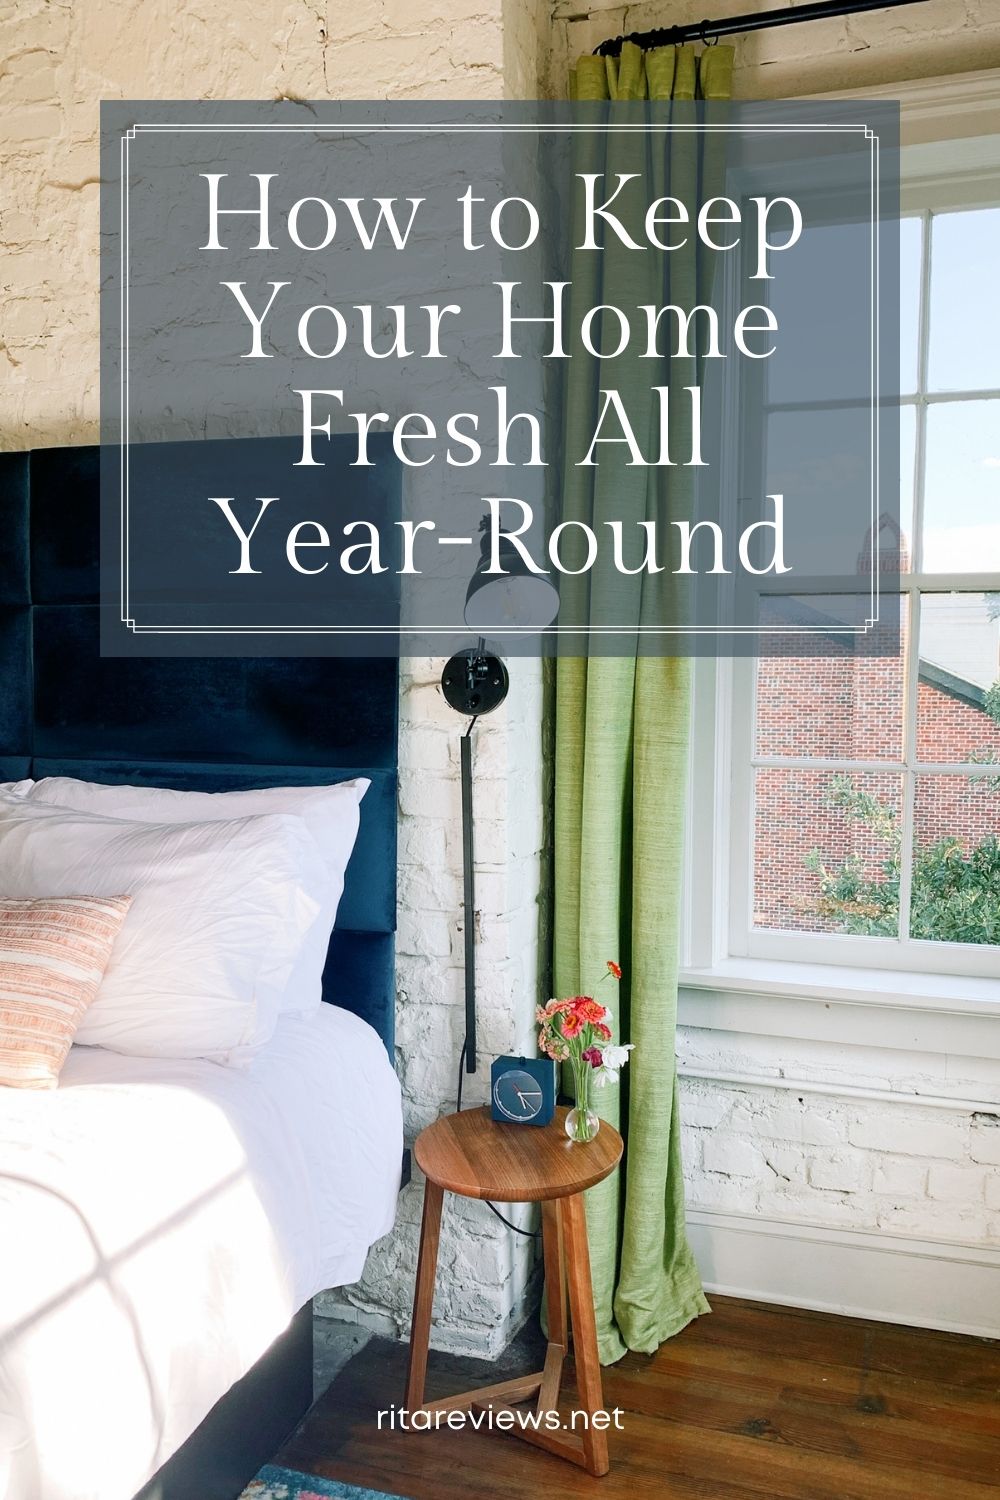 How to Keep Your Home Fresh All Year-Round